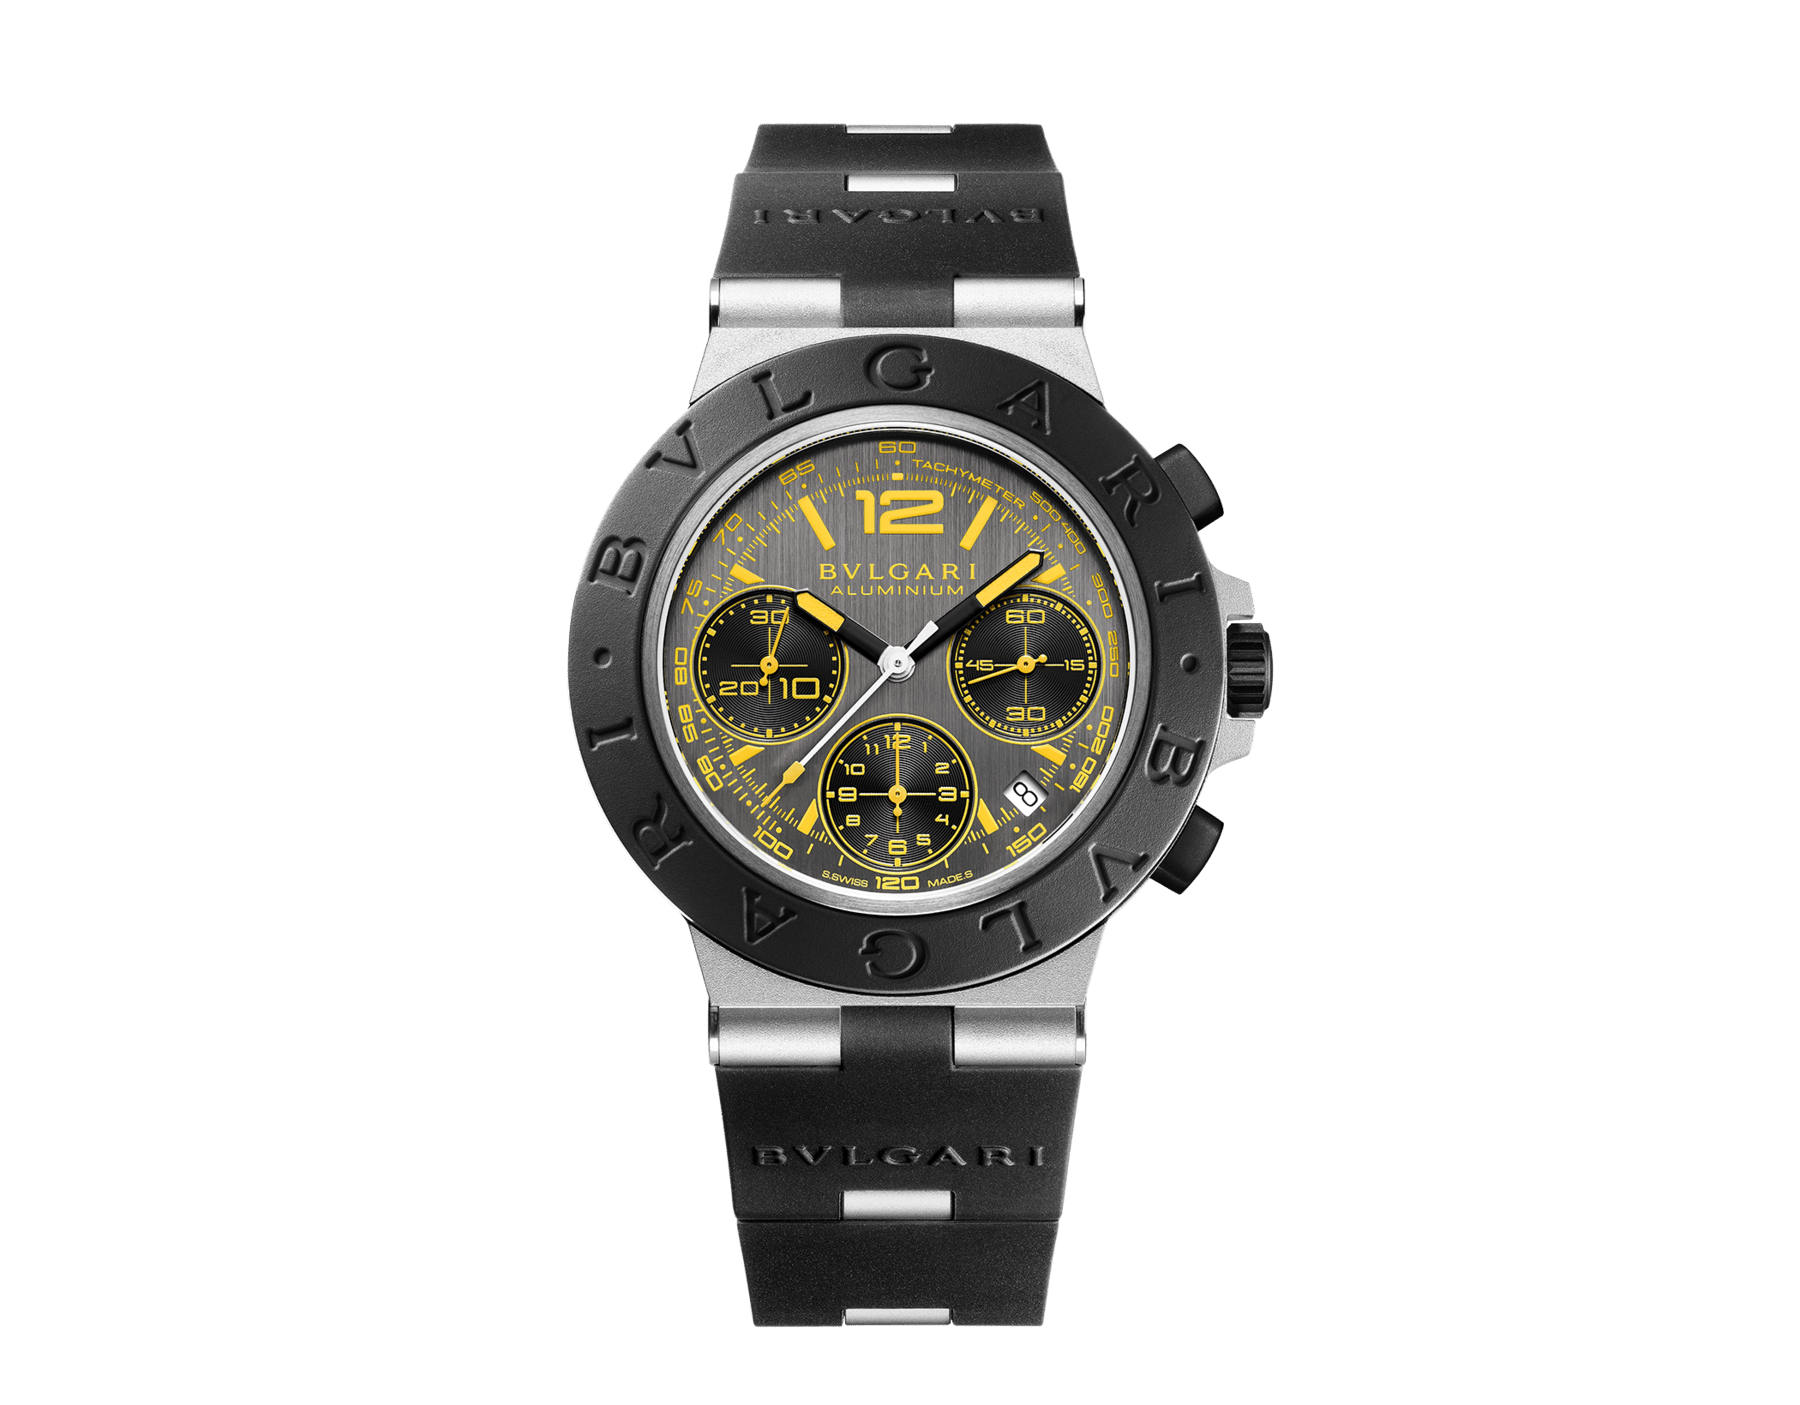 Bulgari Aluminium Gran Turismo Special Edition watch with mechanical movement, automatic winding, chronograph, 41 mm aluminum case, black rubber bezel with BVLGARI BVLGARI engraving, anthracite brushed dial and black rubber strap. Water-resistant up to 100 meters. Limited edition of 1,200 pieces 103893 image 1